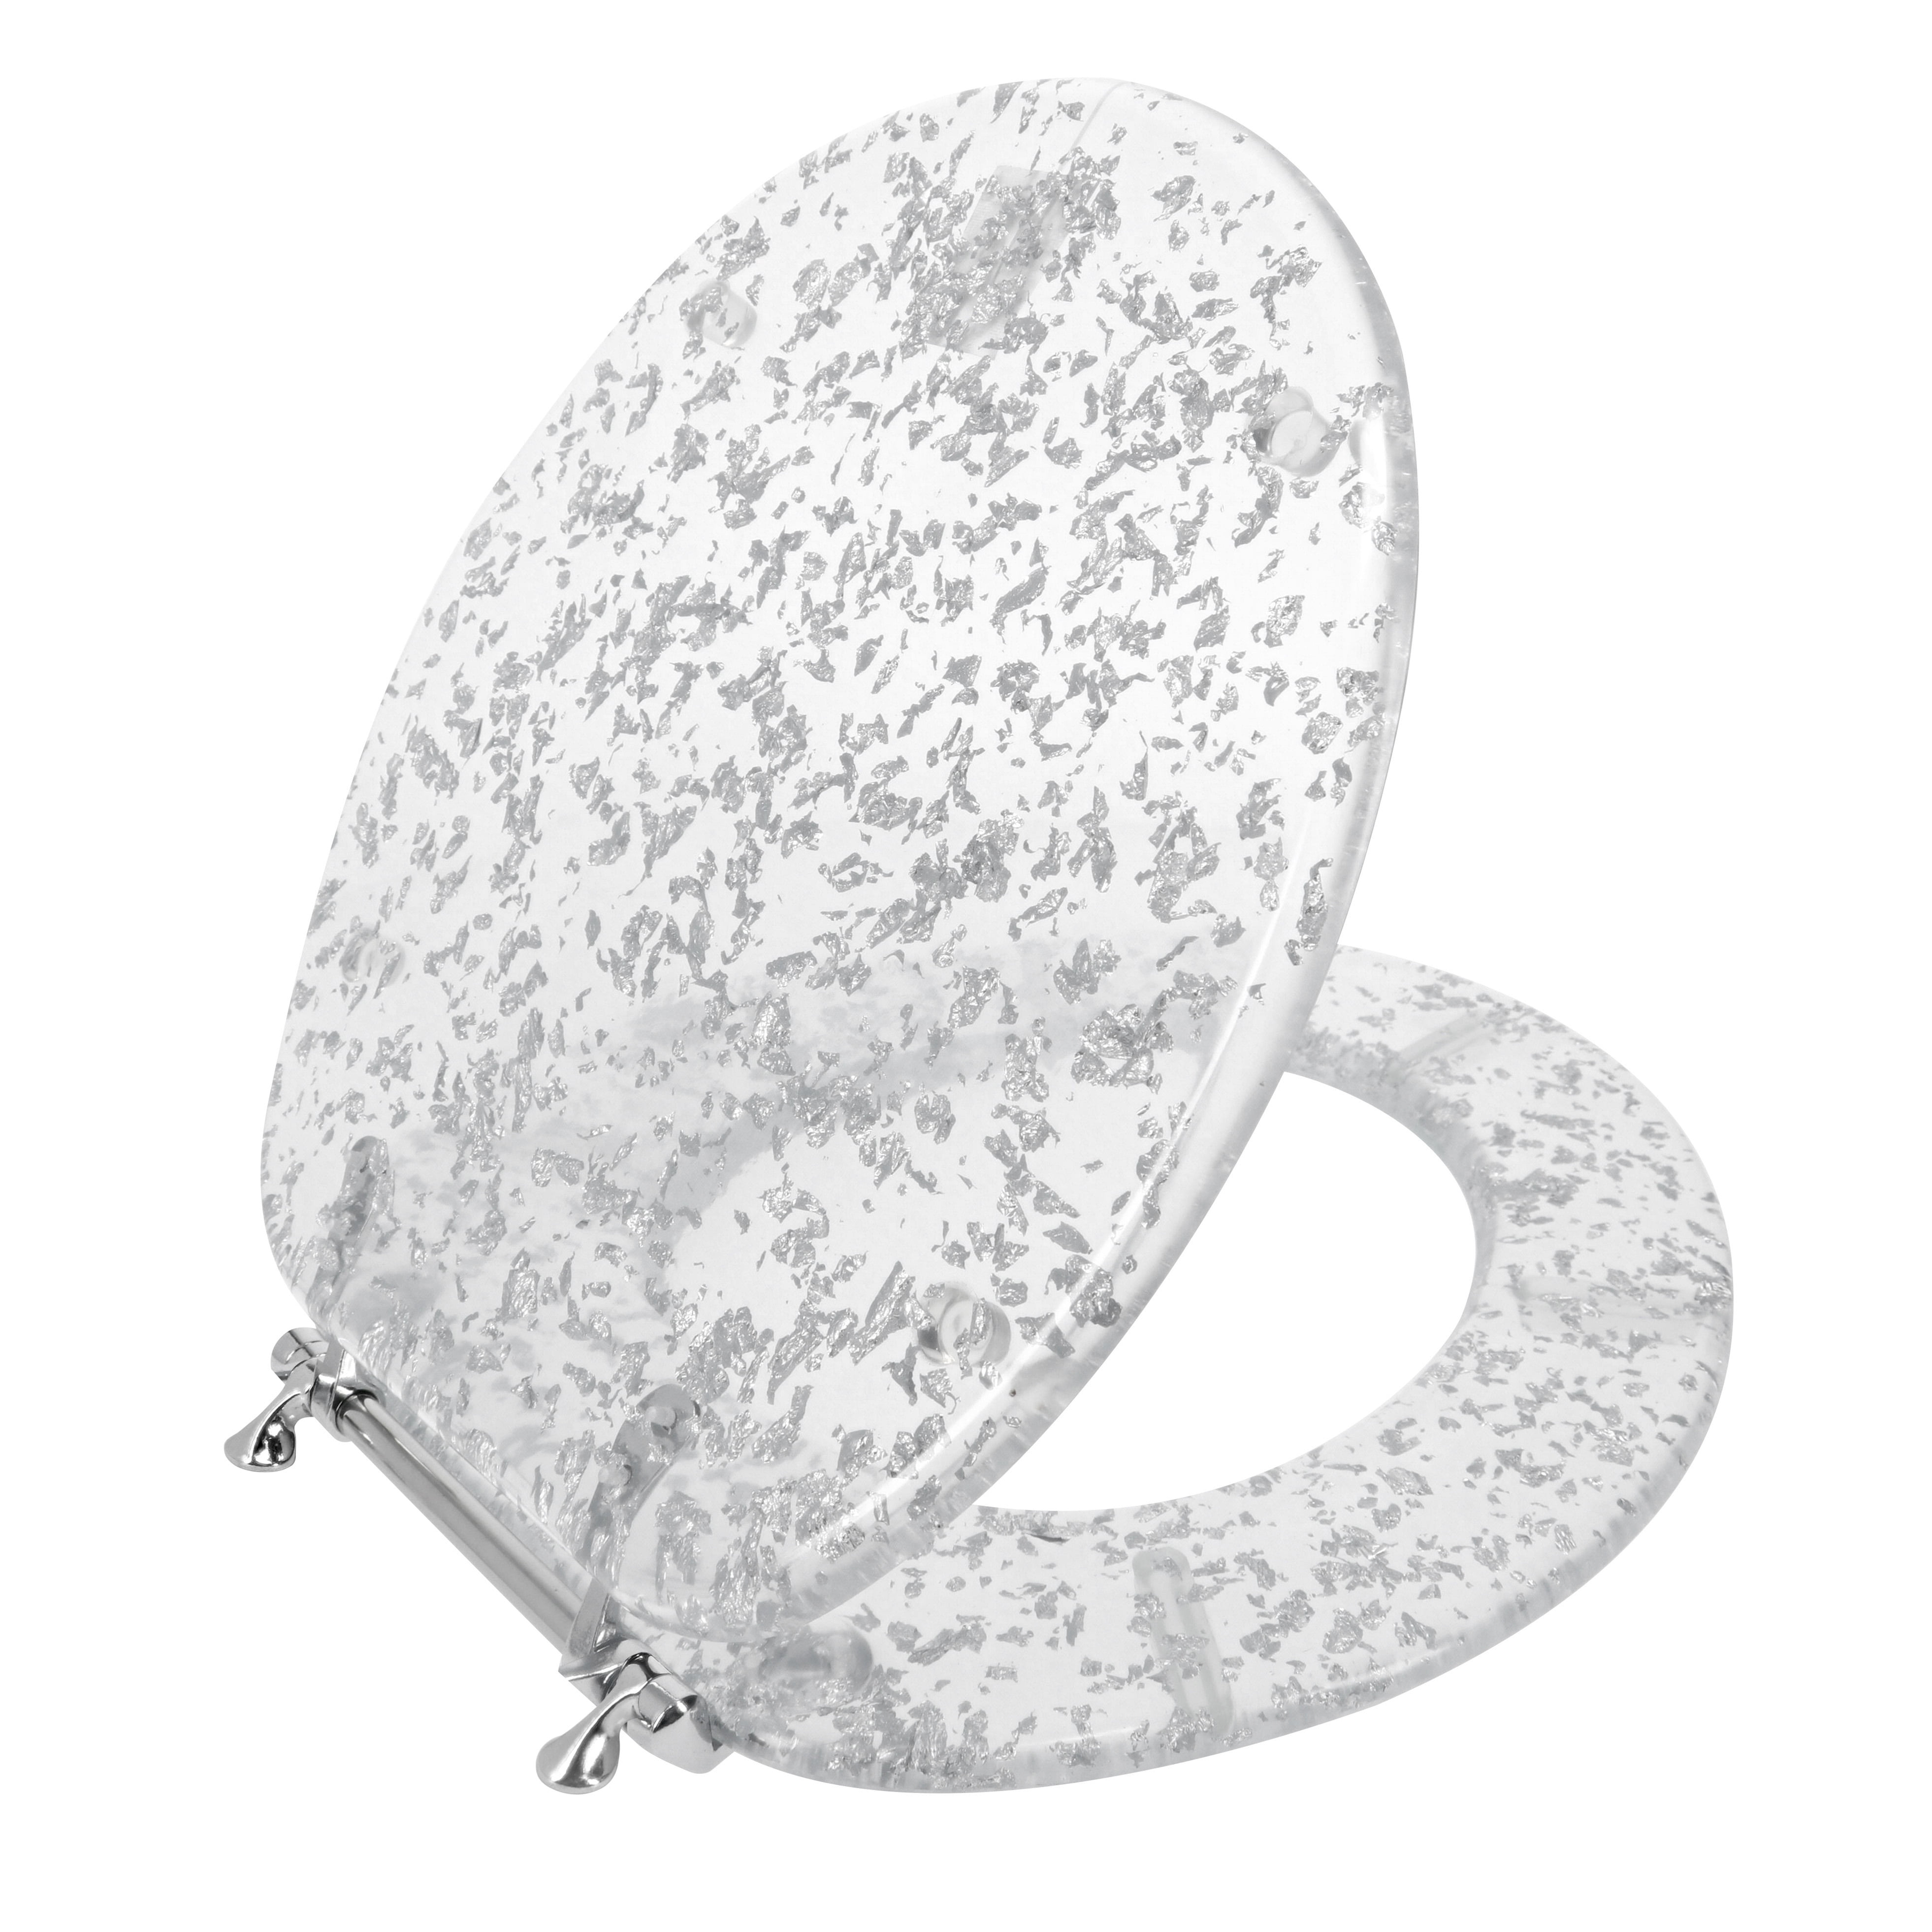 Silver Foil Ginsey Standard Resin Toilet Seat with Chrome Hinges